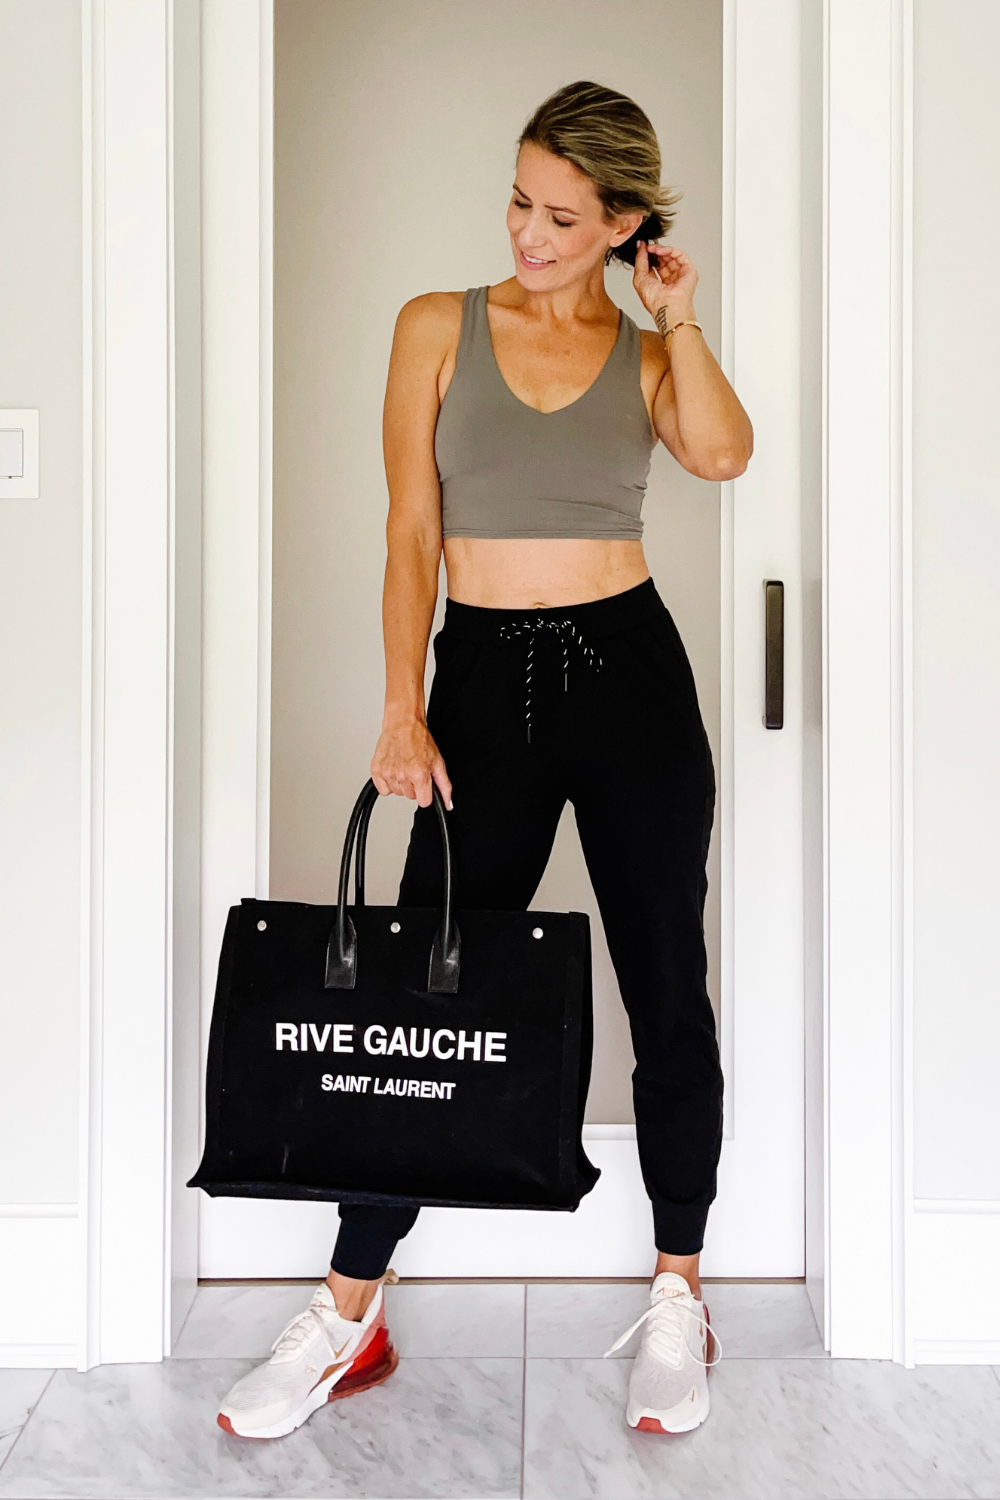 Sports bra, joggers, tote and sneakers